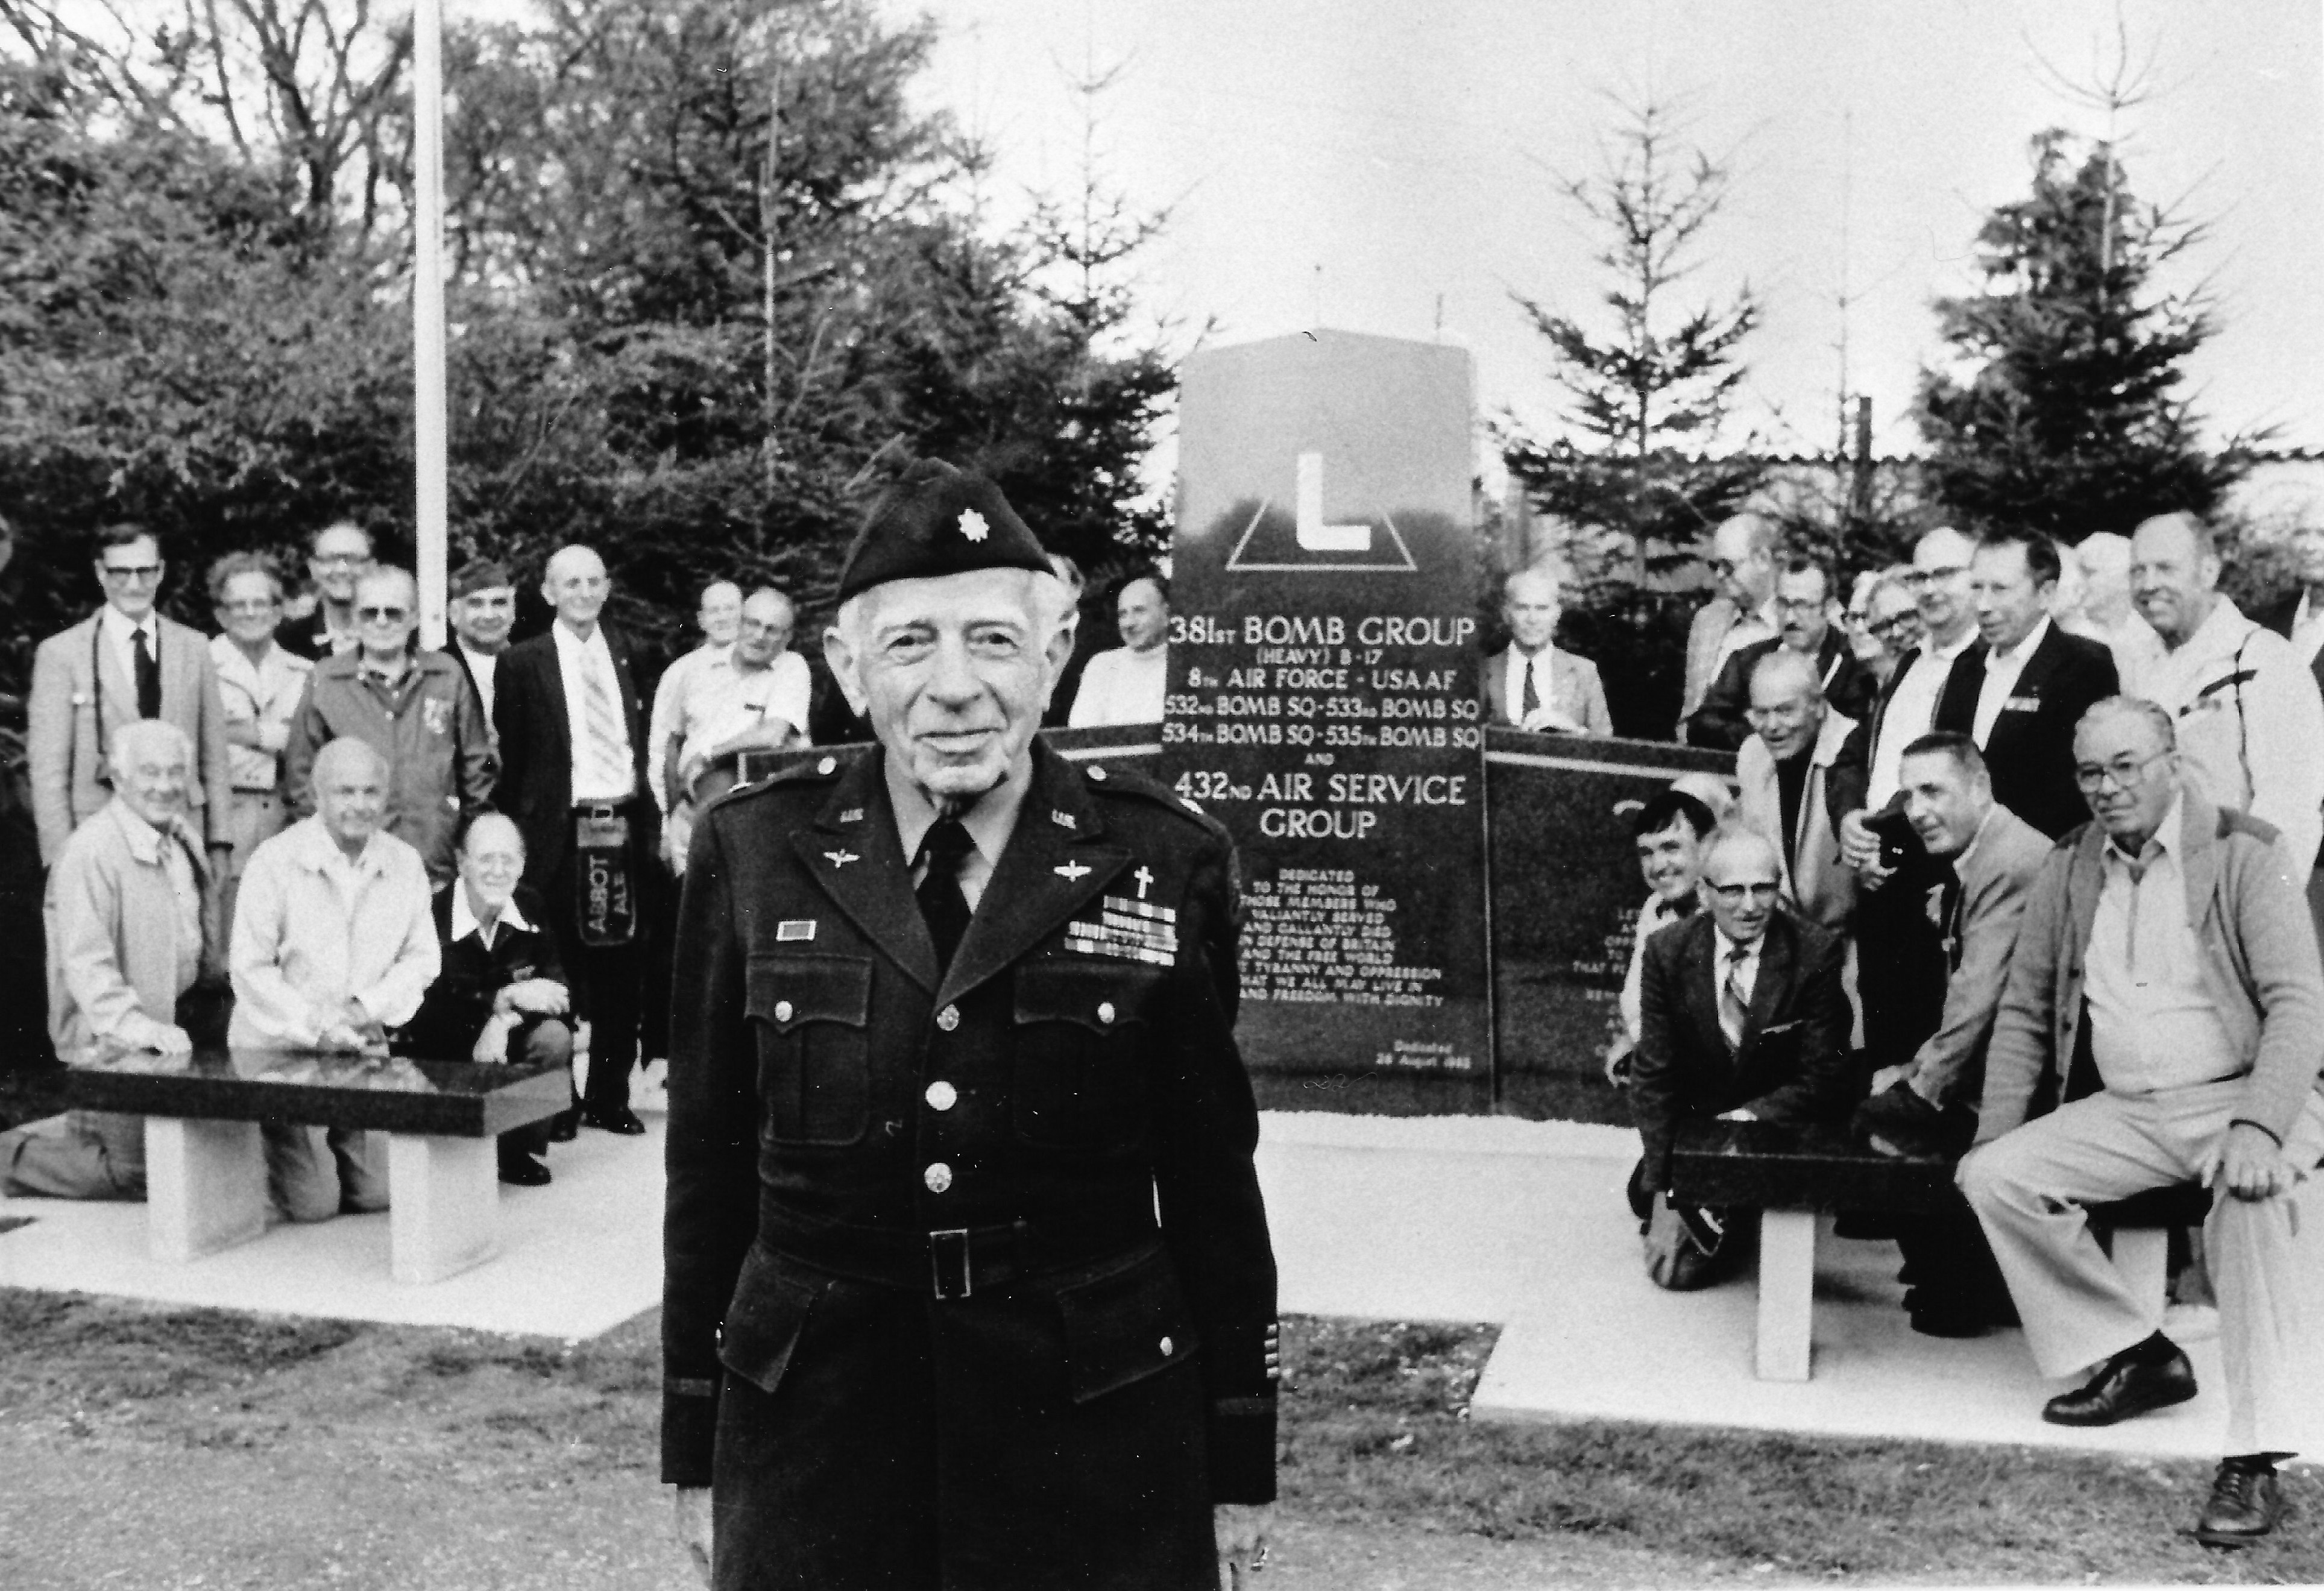 On August 28, 1982, scores of American veterans and their wives returned to Ridgewell to dedicate a memorial to the 381st Bomb Group. They were led by their former chaplain, James Good Brown, dressed in his ‘pinks and greens’. (Author’s collection)